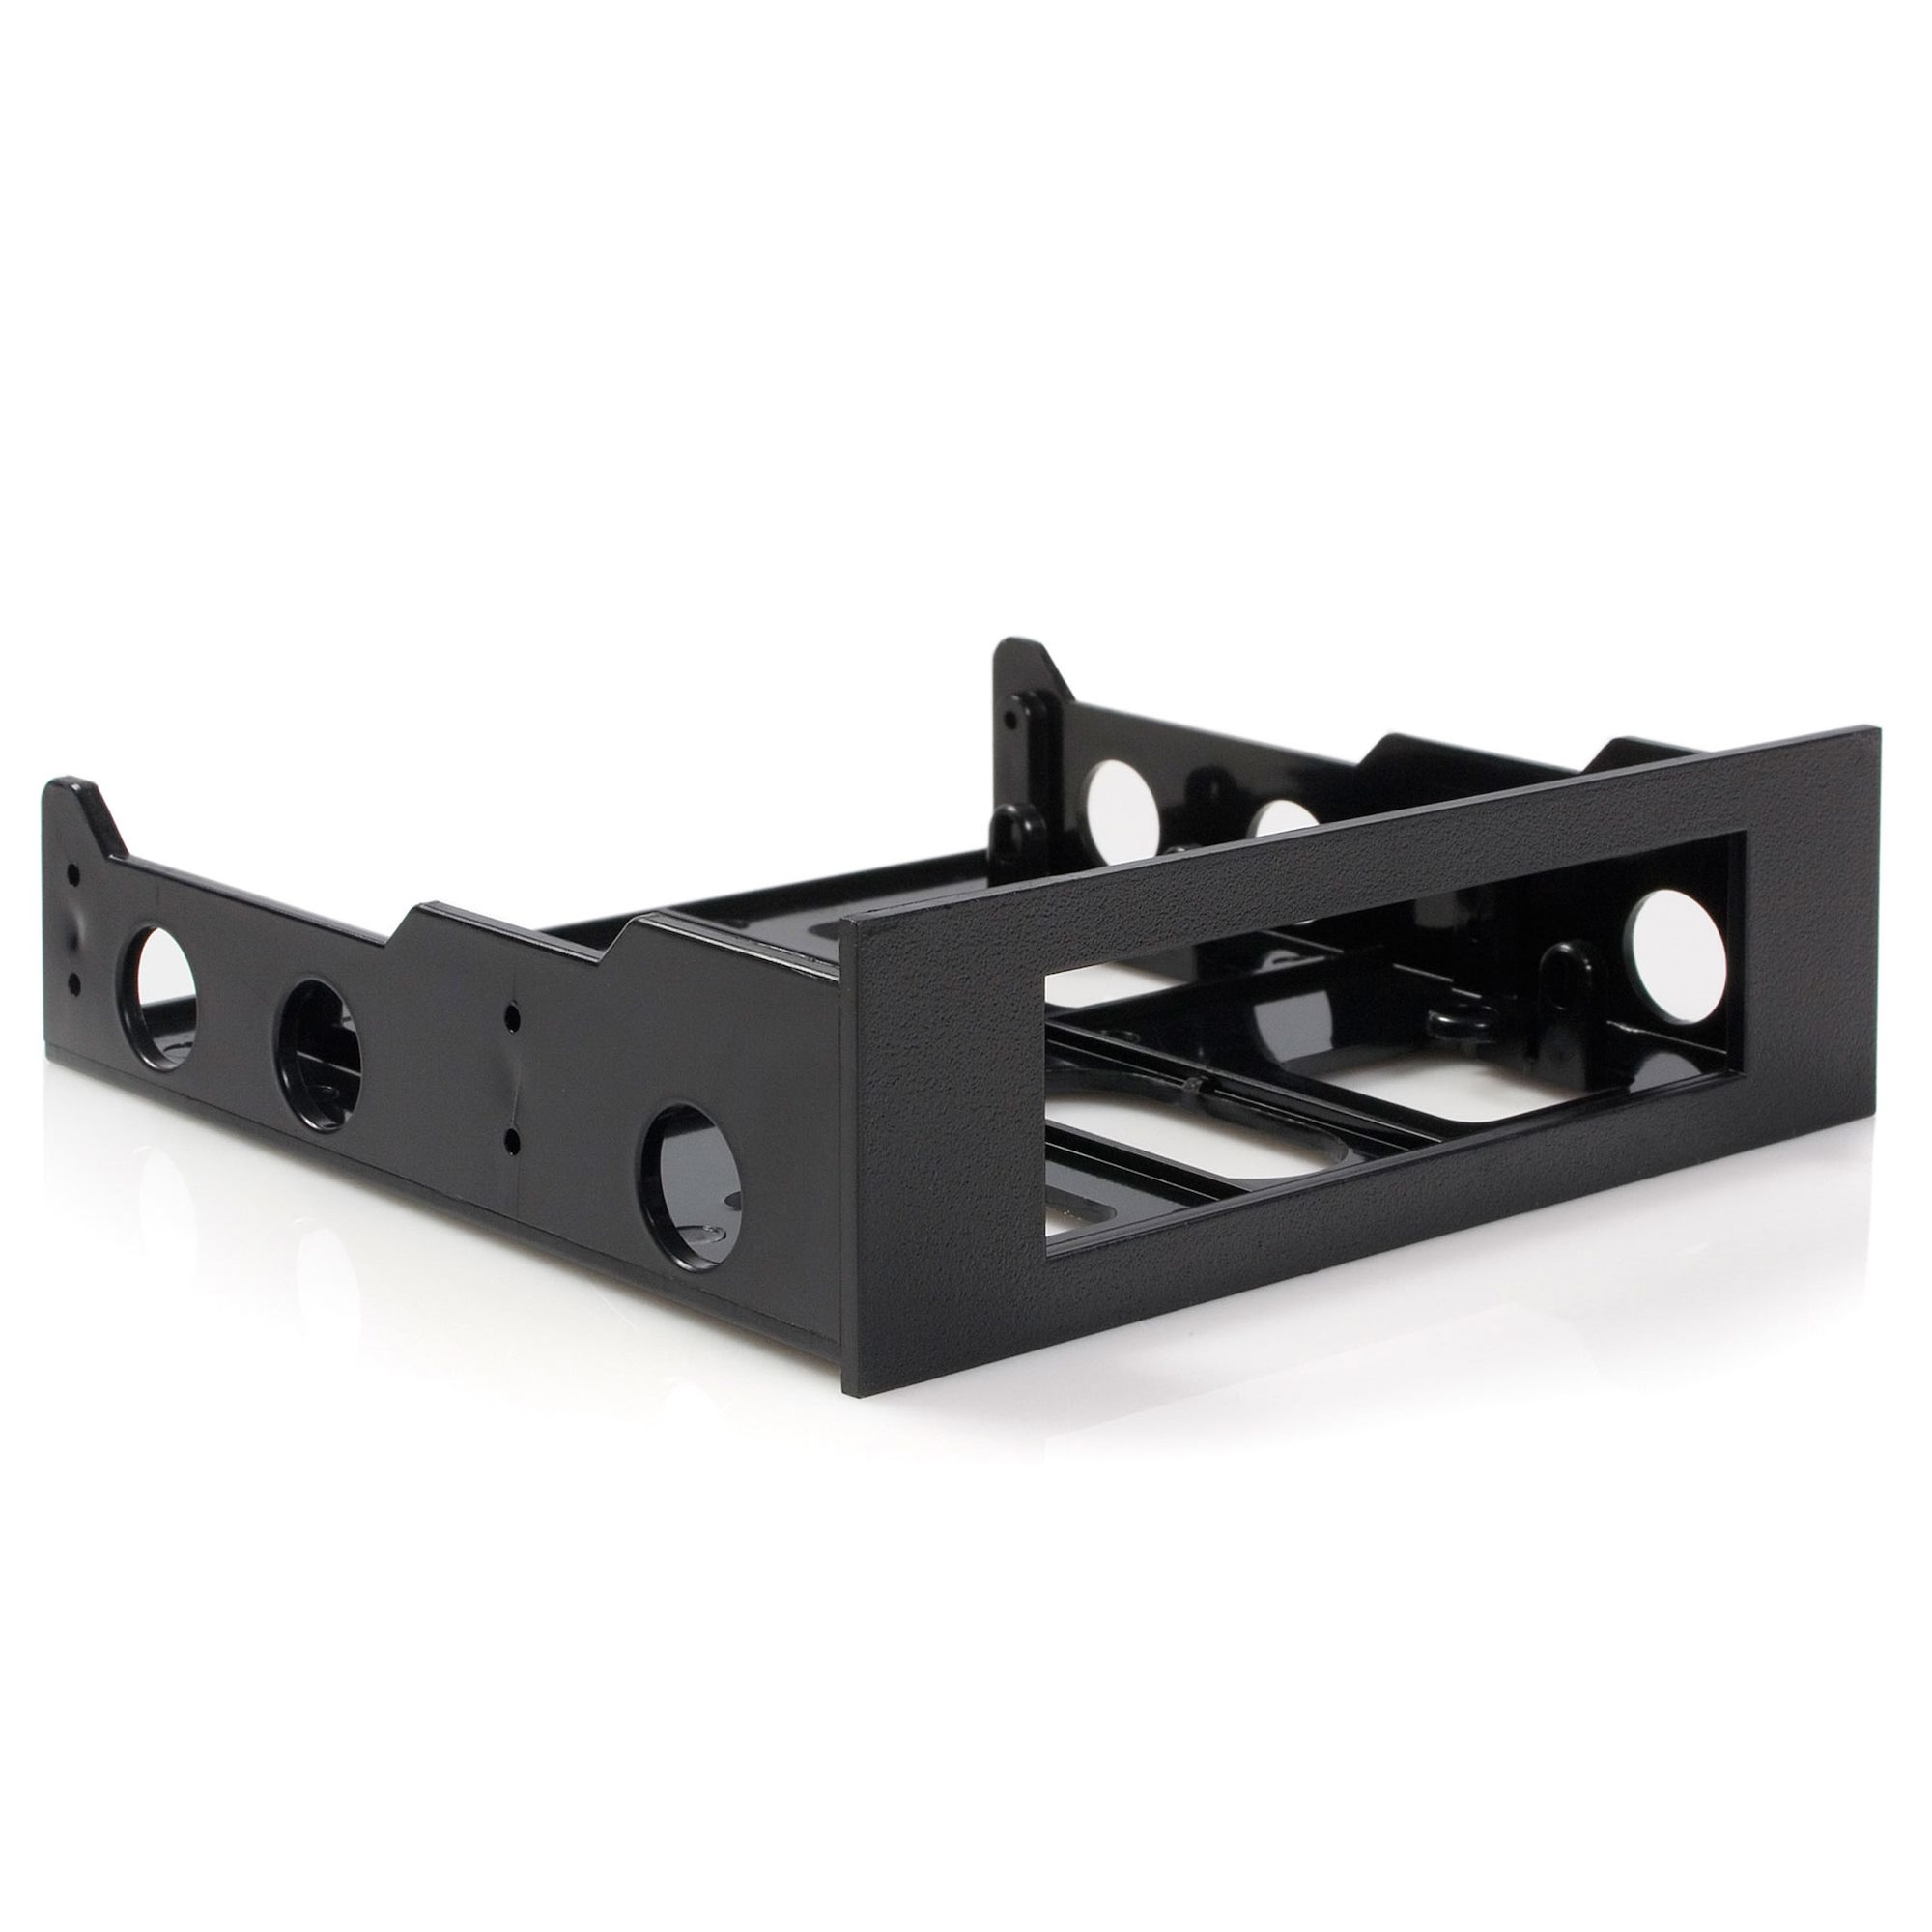 StarTech.com 3.5" to 5.25" Front Bay Mounting Bracket